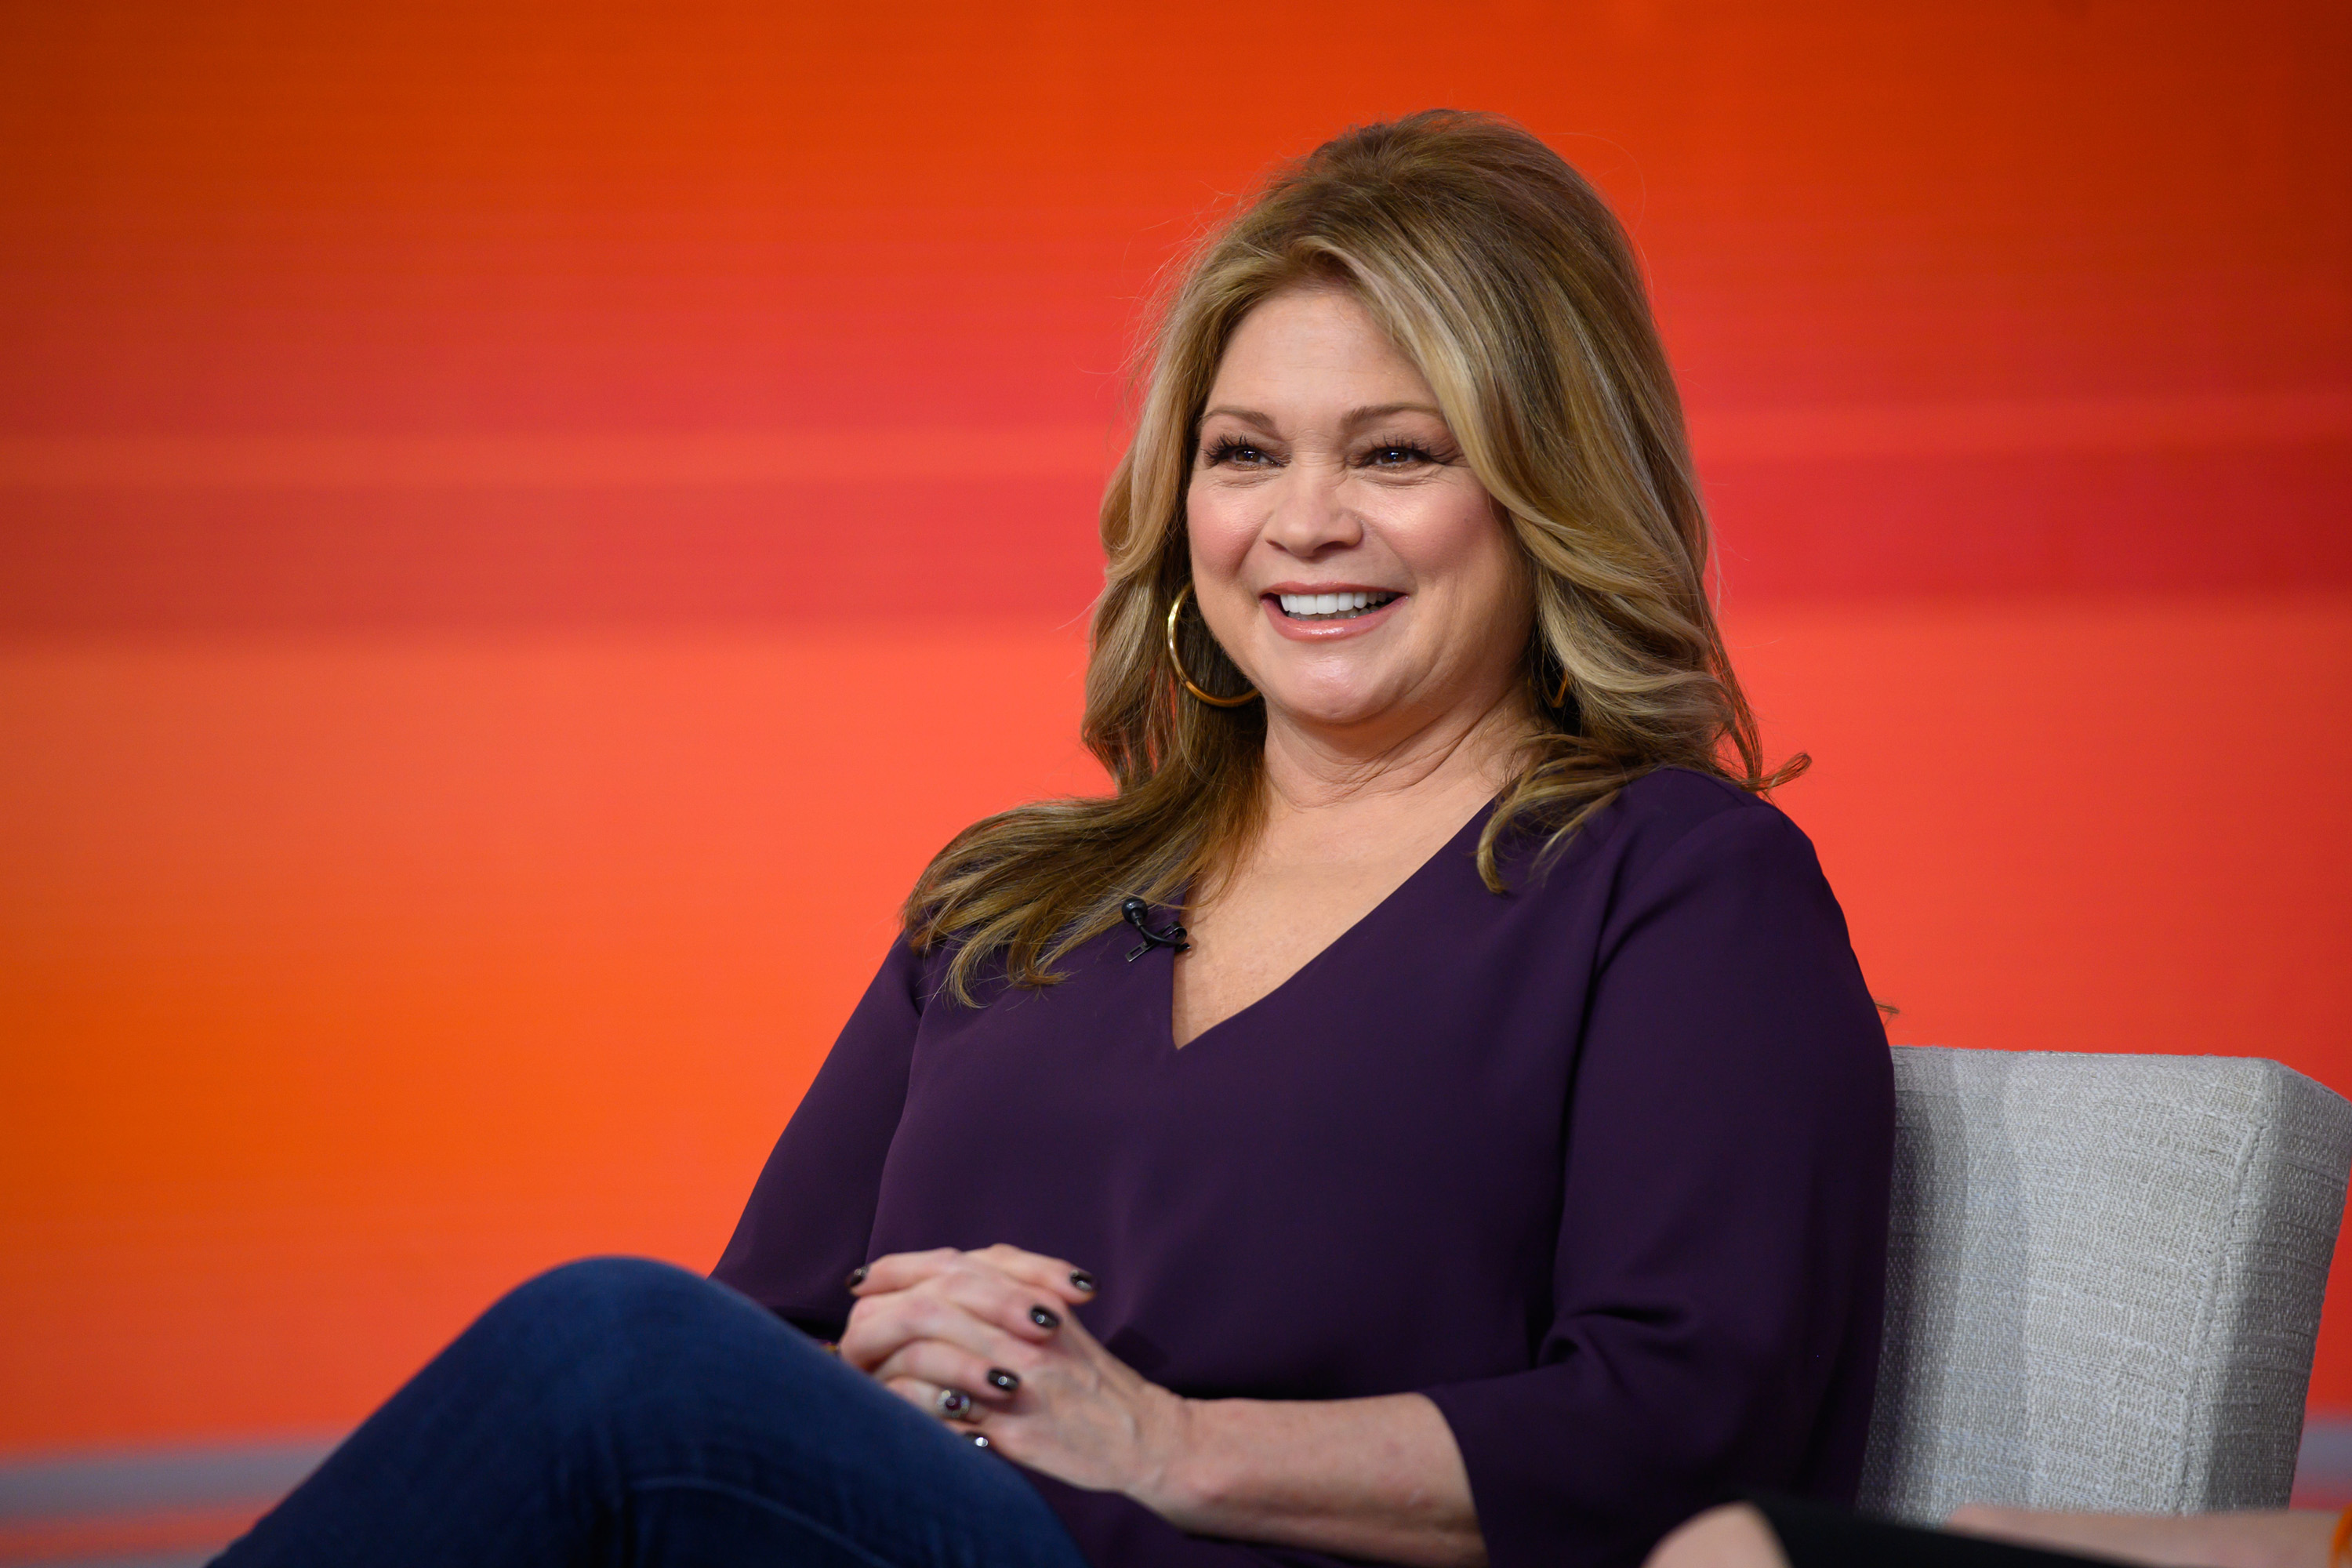 Valerie Bertinelli bei "Today" am 24. Januar 2020. | Quelle: Getty Images